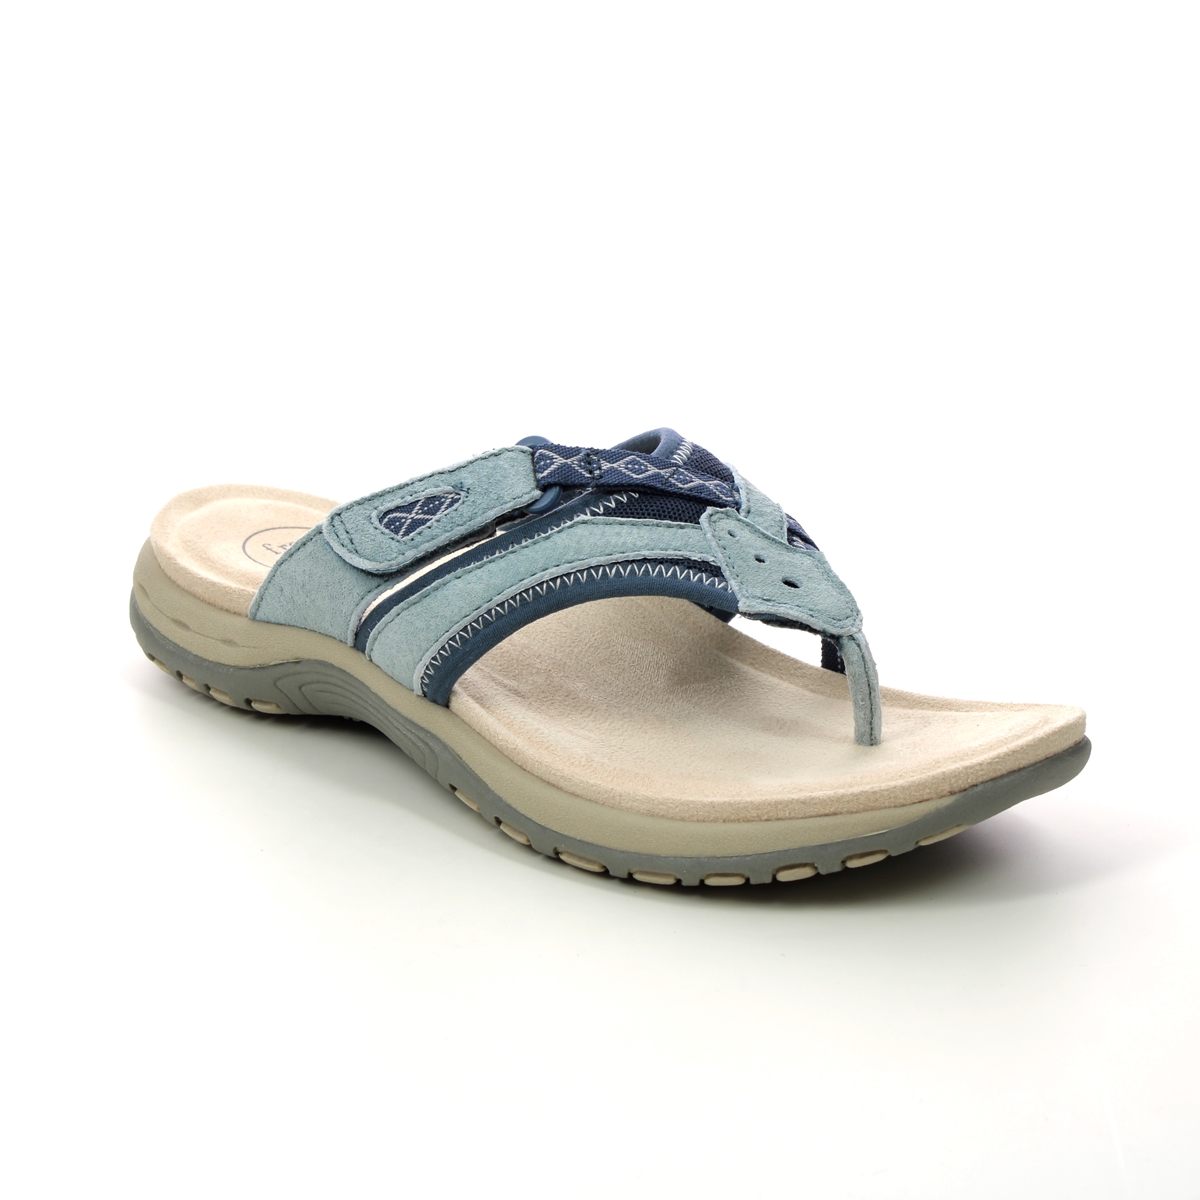 Earth Spirit Juliet 01 Blue Suede Womens Toe Post Sandals 40511-72 in a Plain Leather in Size 6